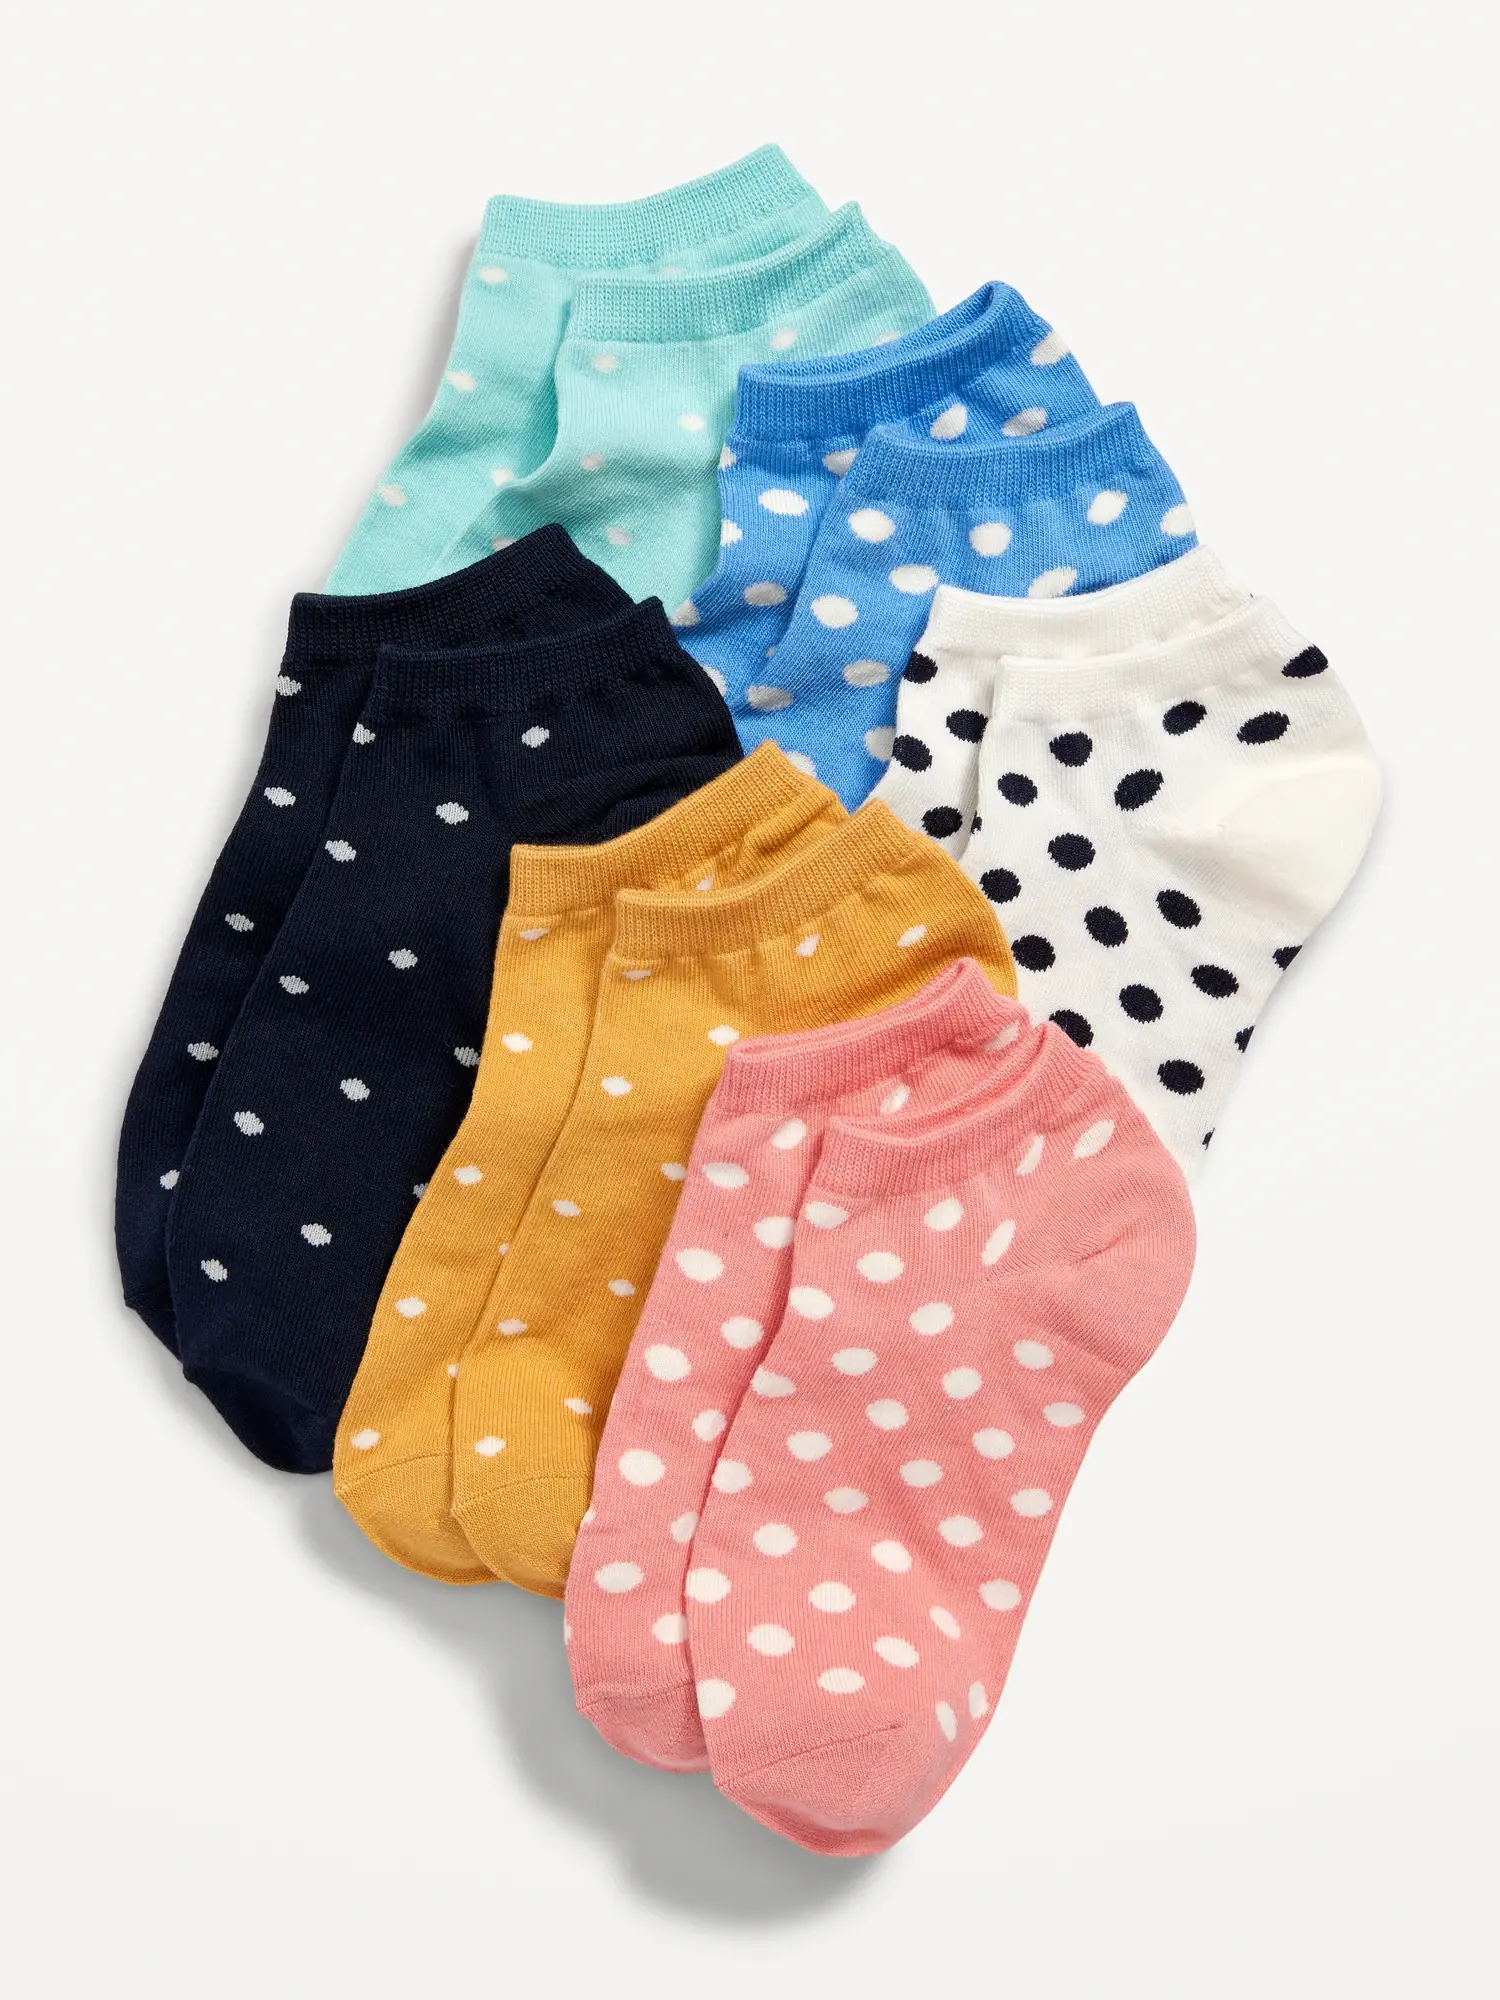 Old Navy Printed Ankle Socks 6-Pack for Girls pink. 1